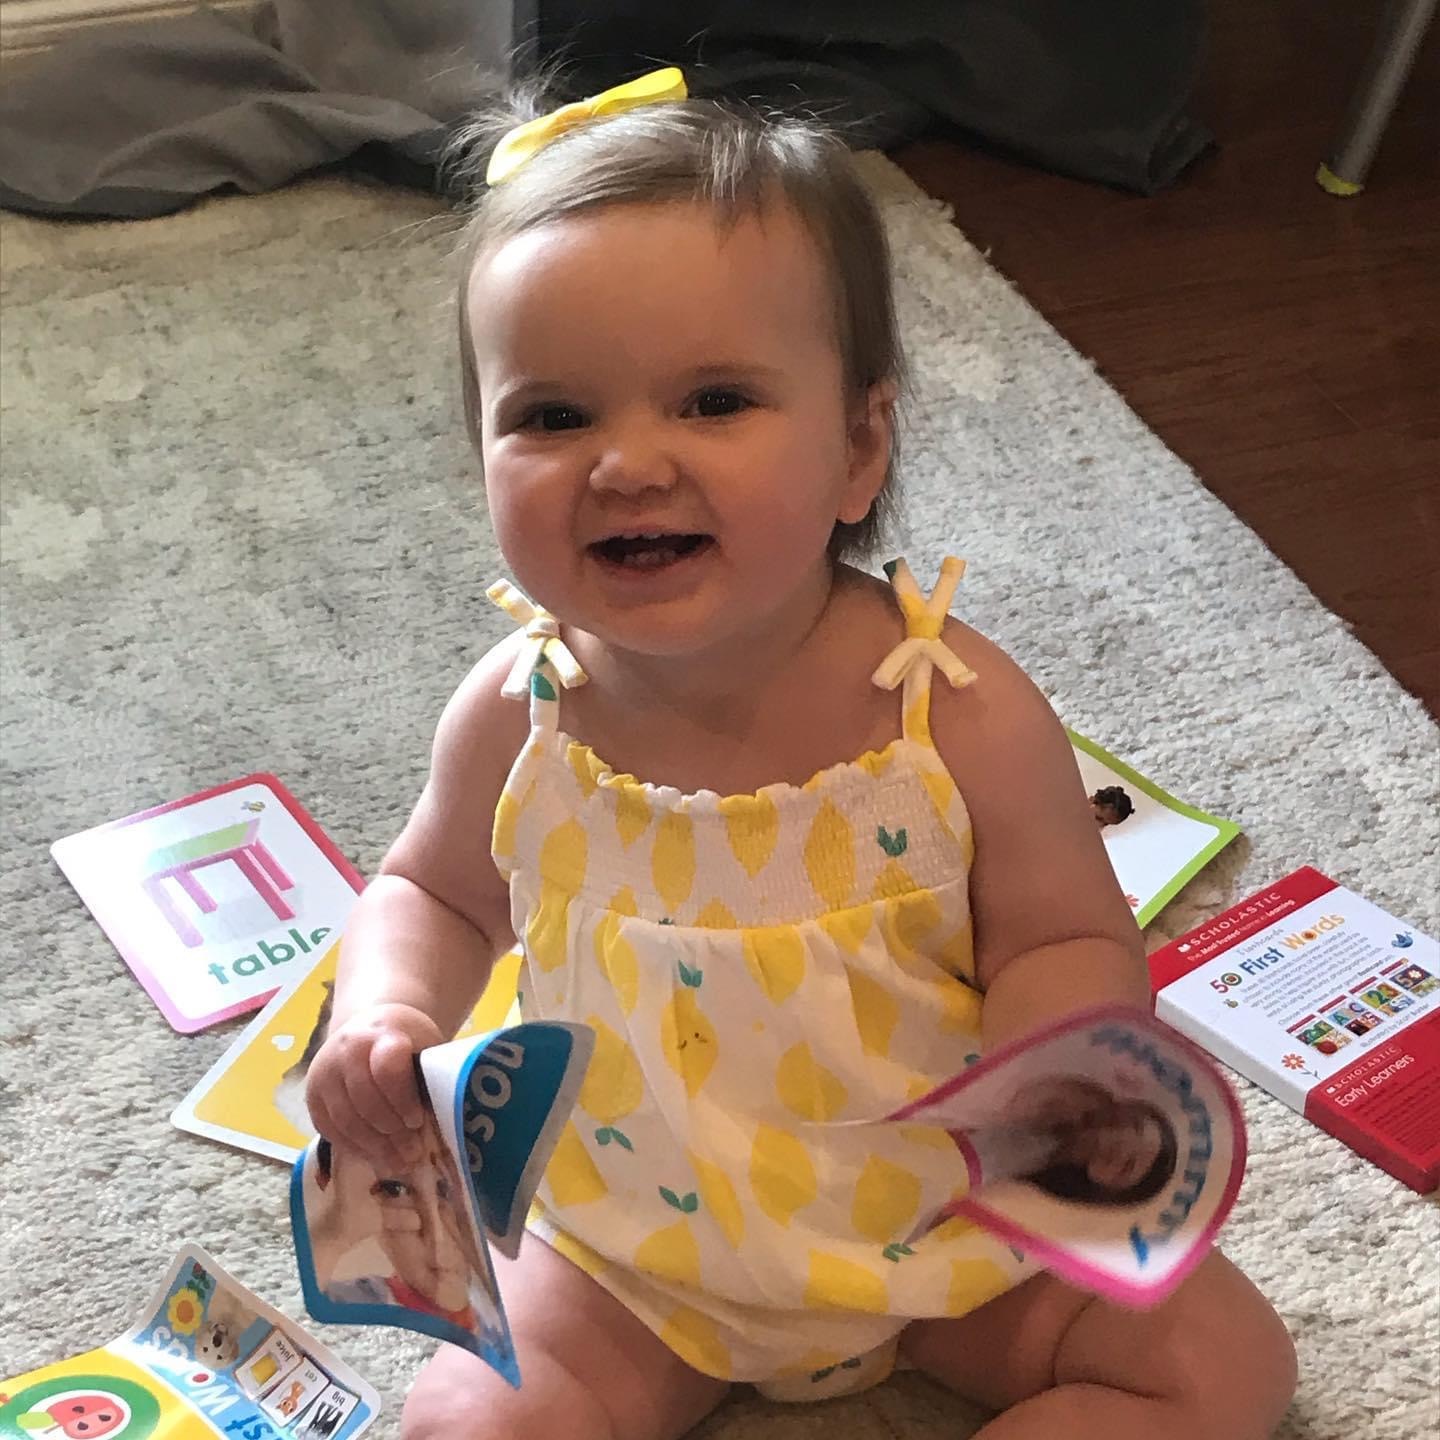 Frank’s great grandniece , Emily, now 15 mos.  (Jill and Jim’s granddaughter)<br />
Frank told me several times, “If I knew I was gonna live this long, I would’ve taken better care of myself!”